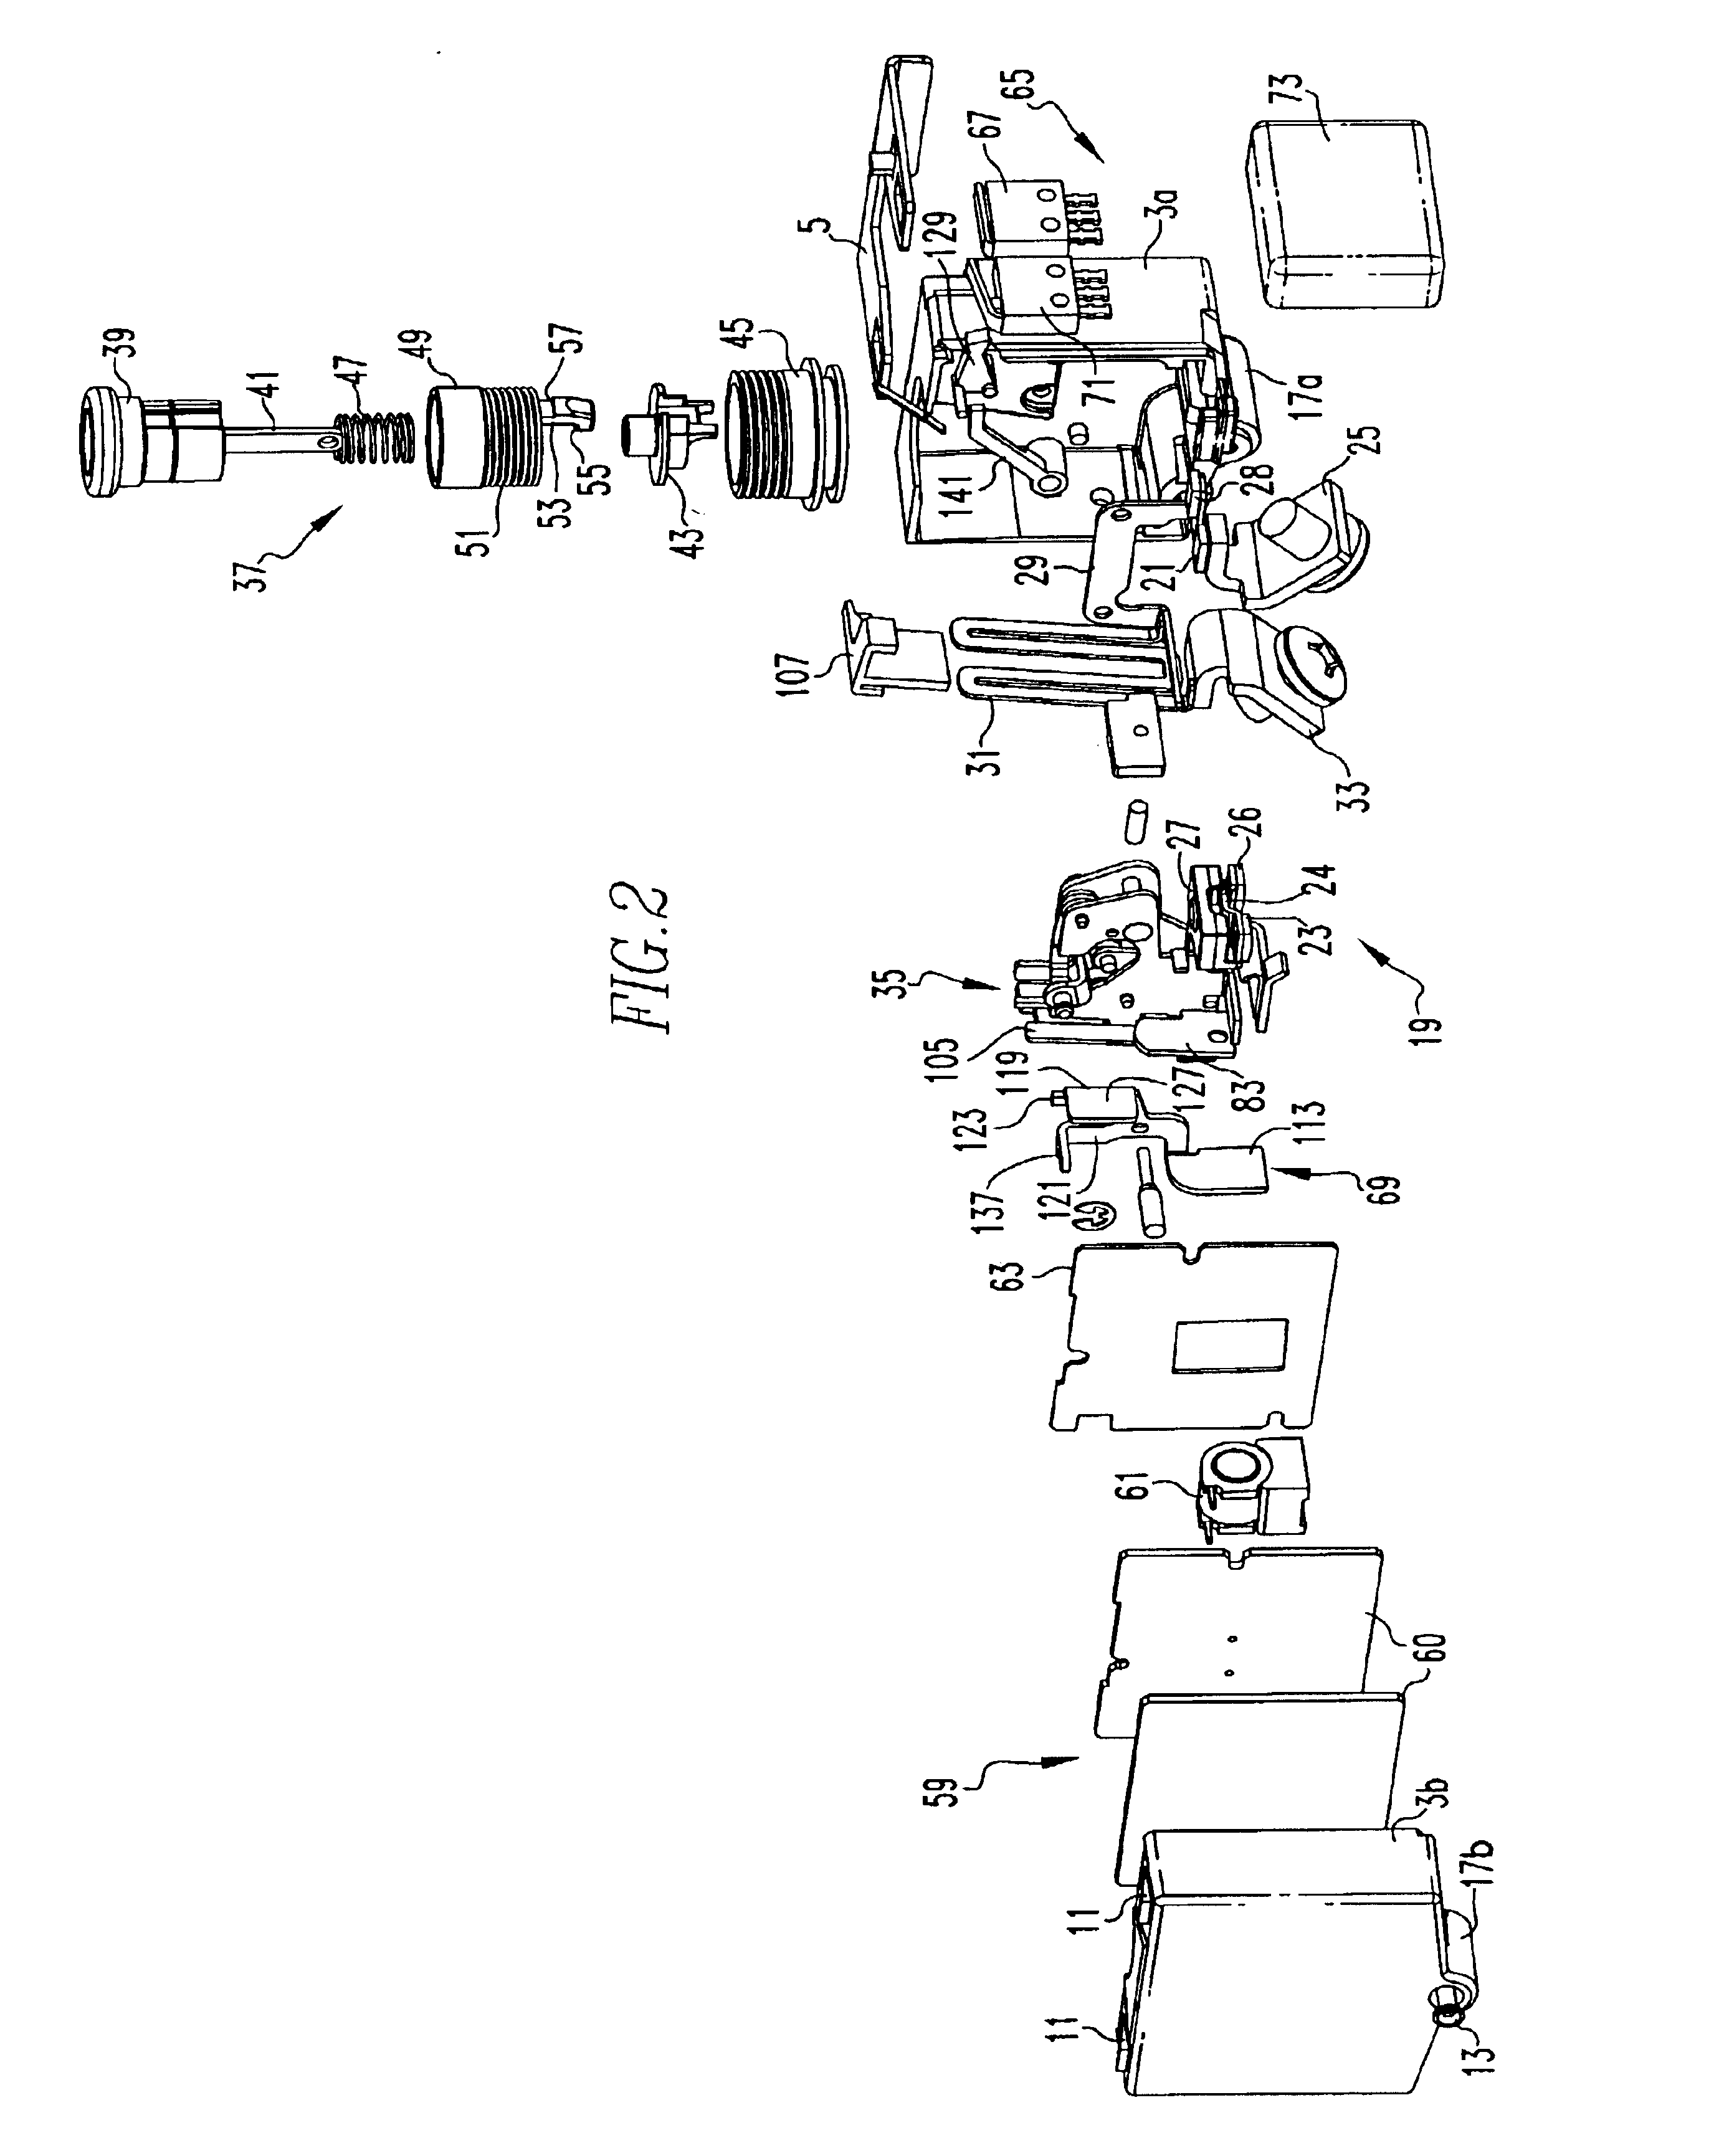 Circuit breaker with auxiliary switches and mechanisms for operating same